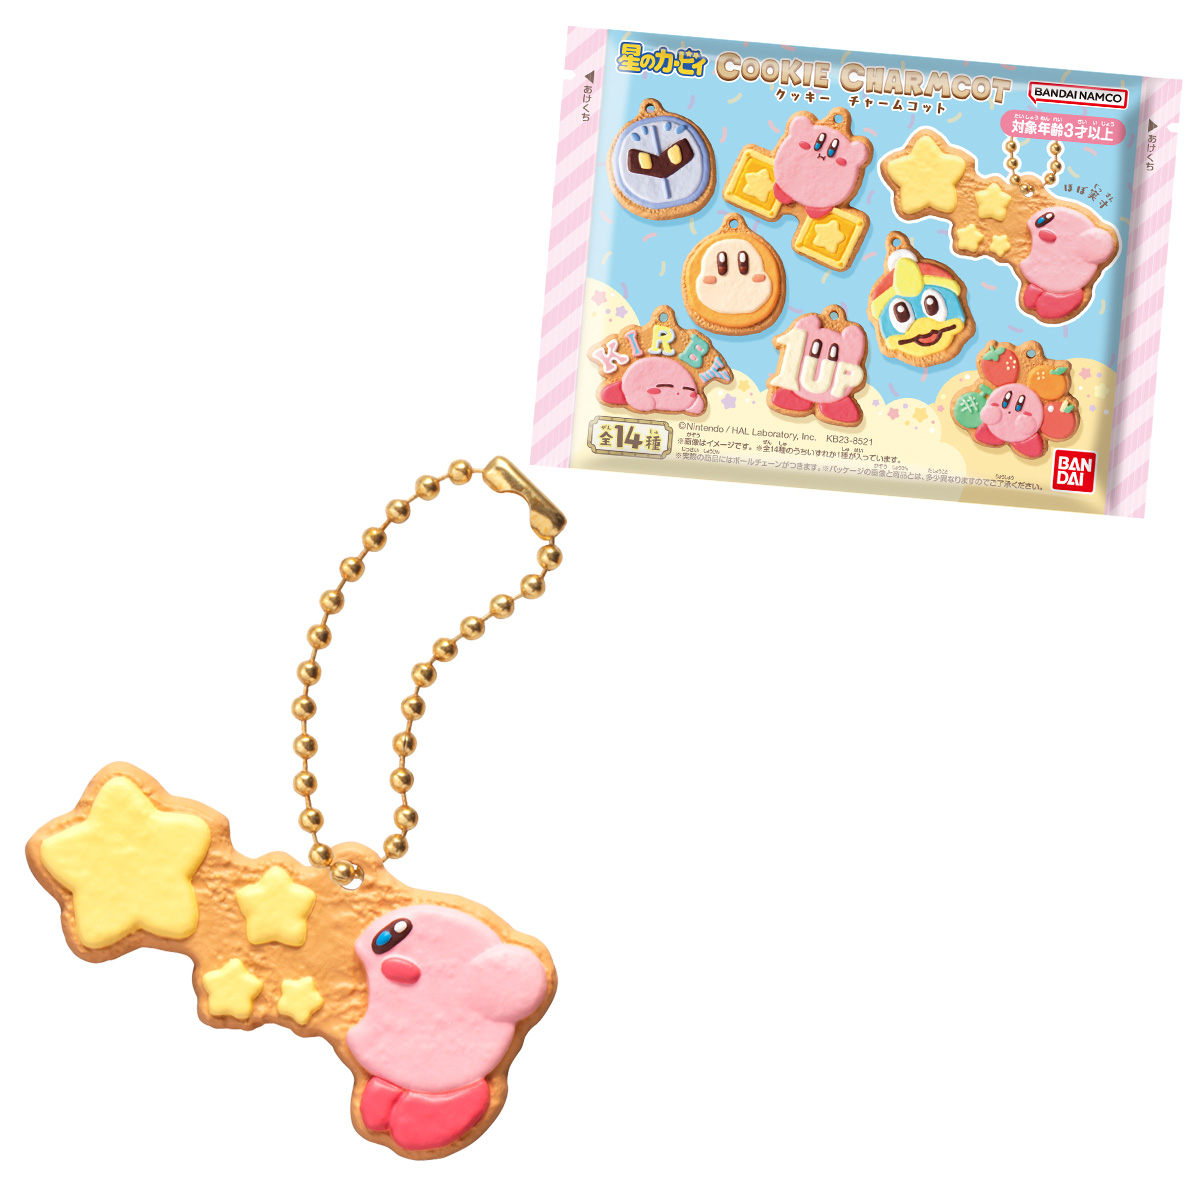 Kirby - Kirby and Friends Cookie Charmcot Blind Keychain image count 1